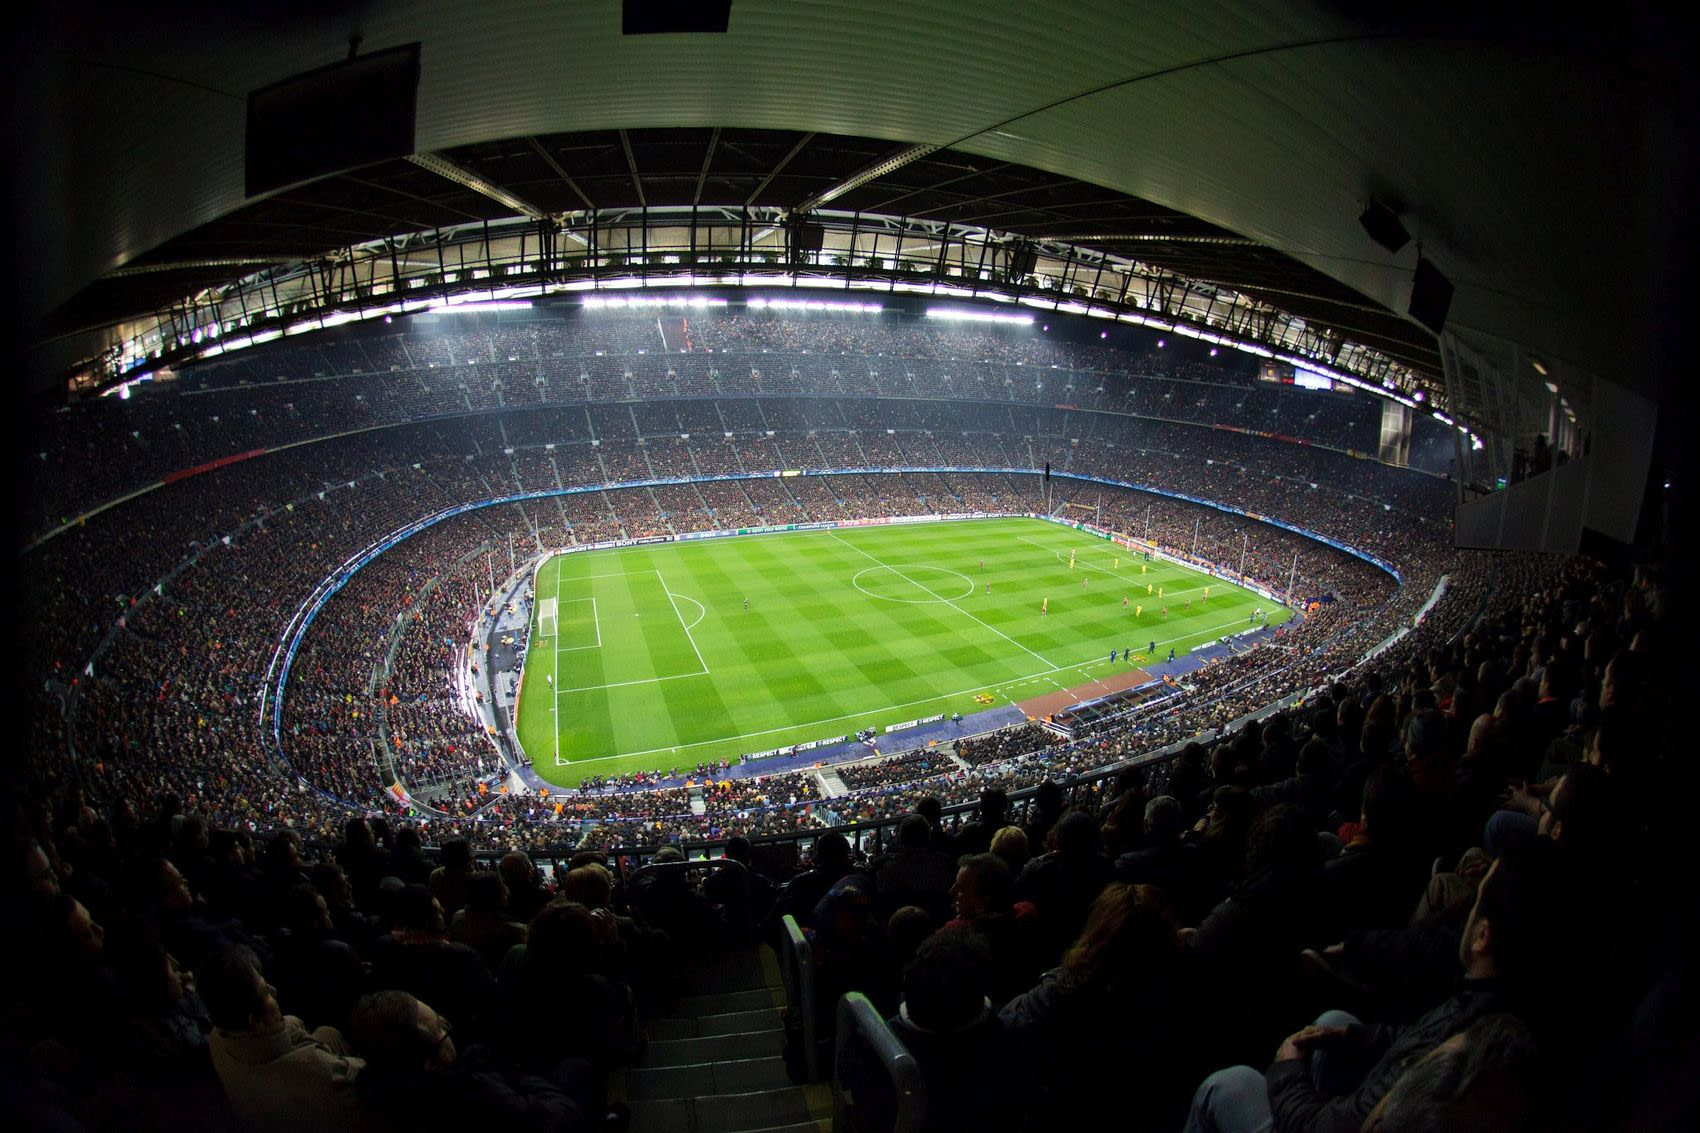 Download wallpapers Camp Nou Barcelona Spain FCB 4k football stadium  sports arena FC Barcelona for desktop with resolution 3840x2400 High  Quality HD pictures wallpapers